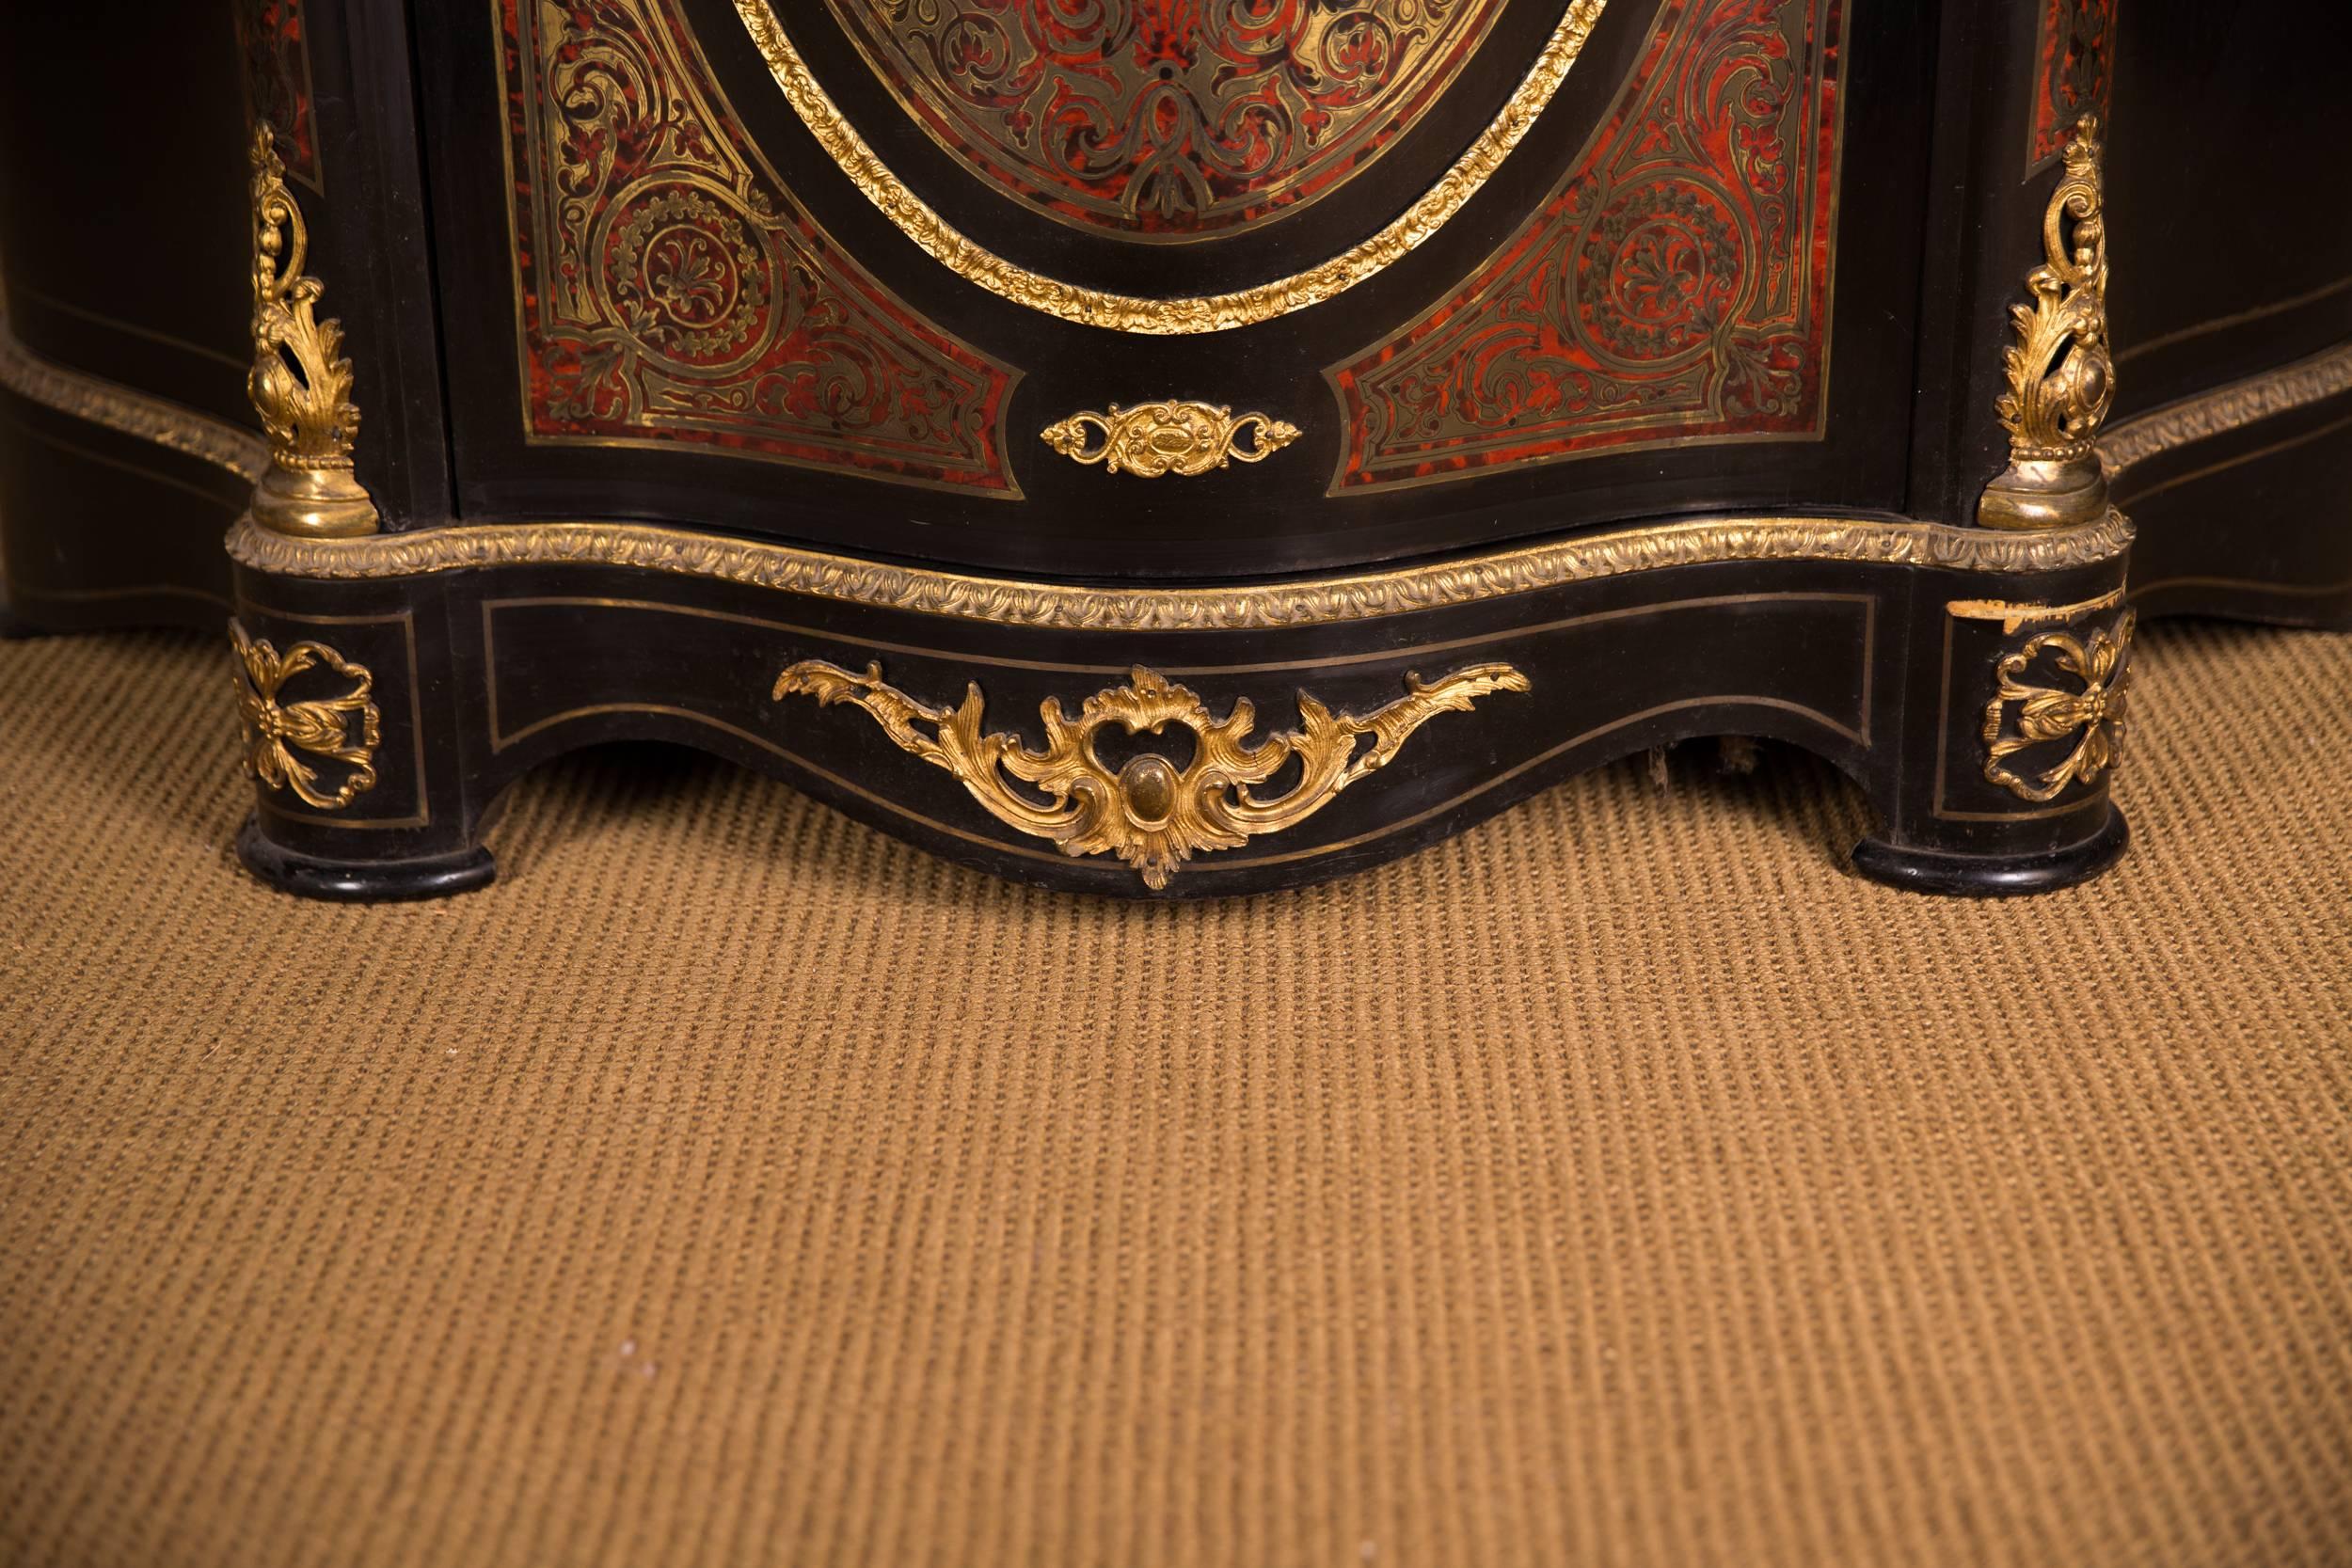 19th Century Original French Boulle Commode in the Louis XV Style 1860 (Barock)